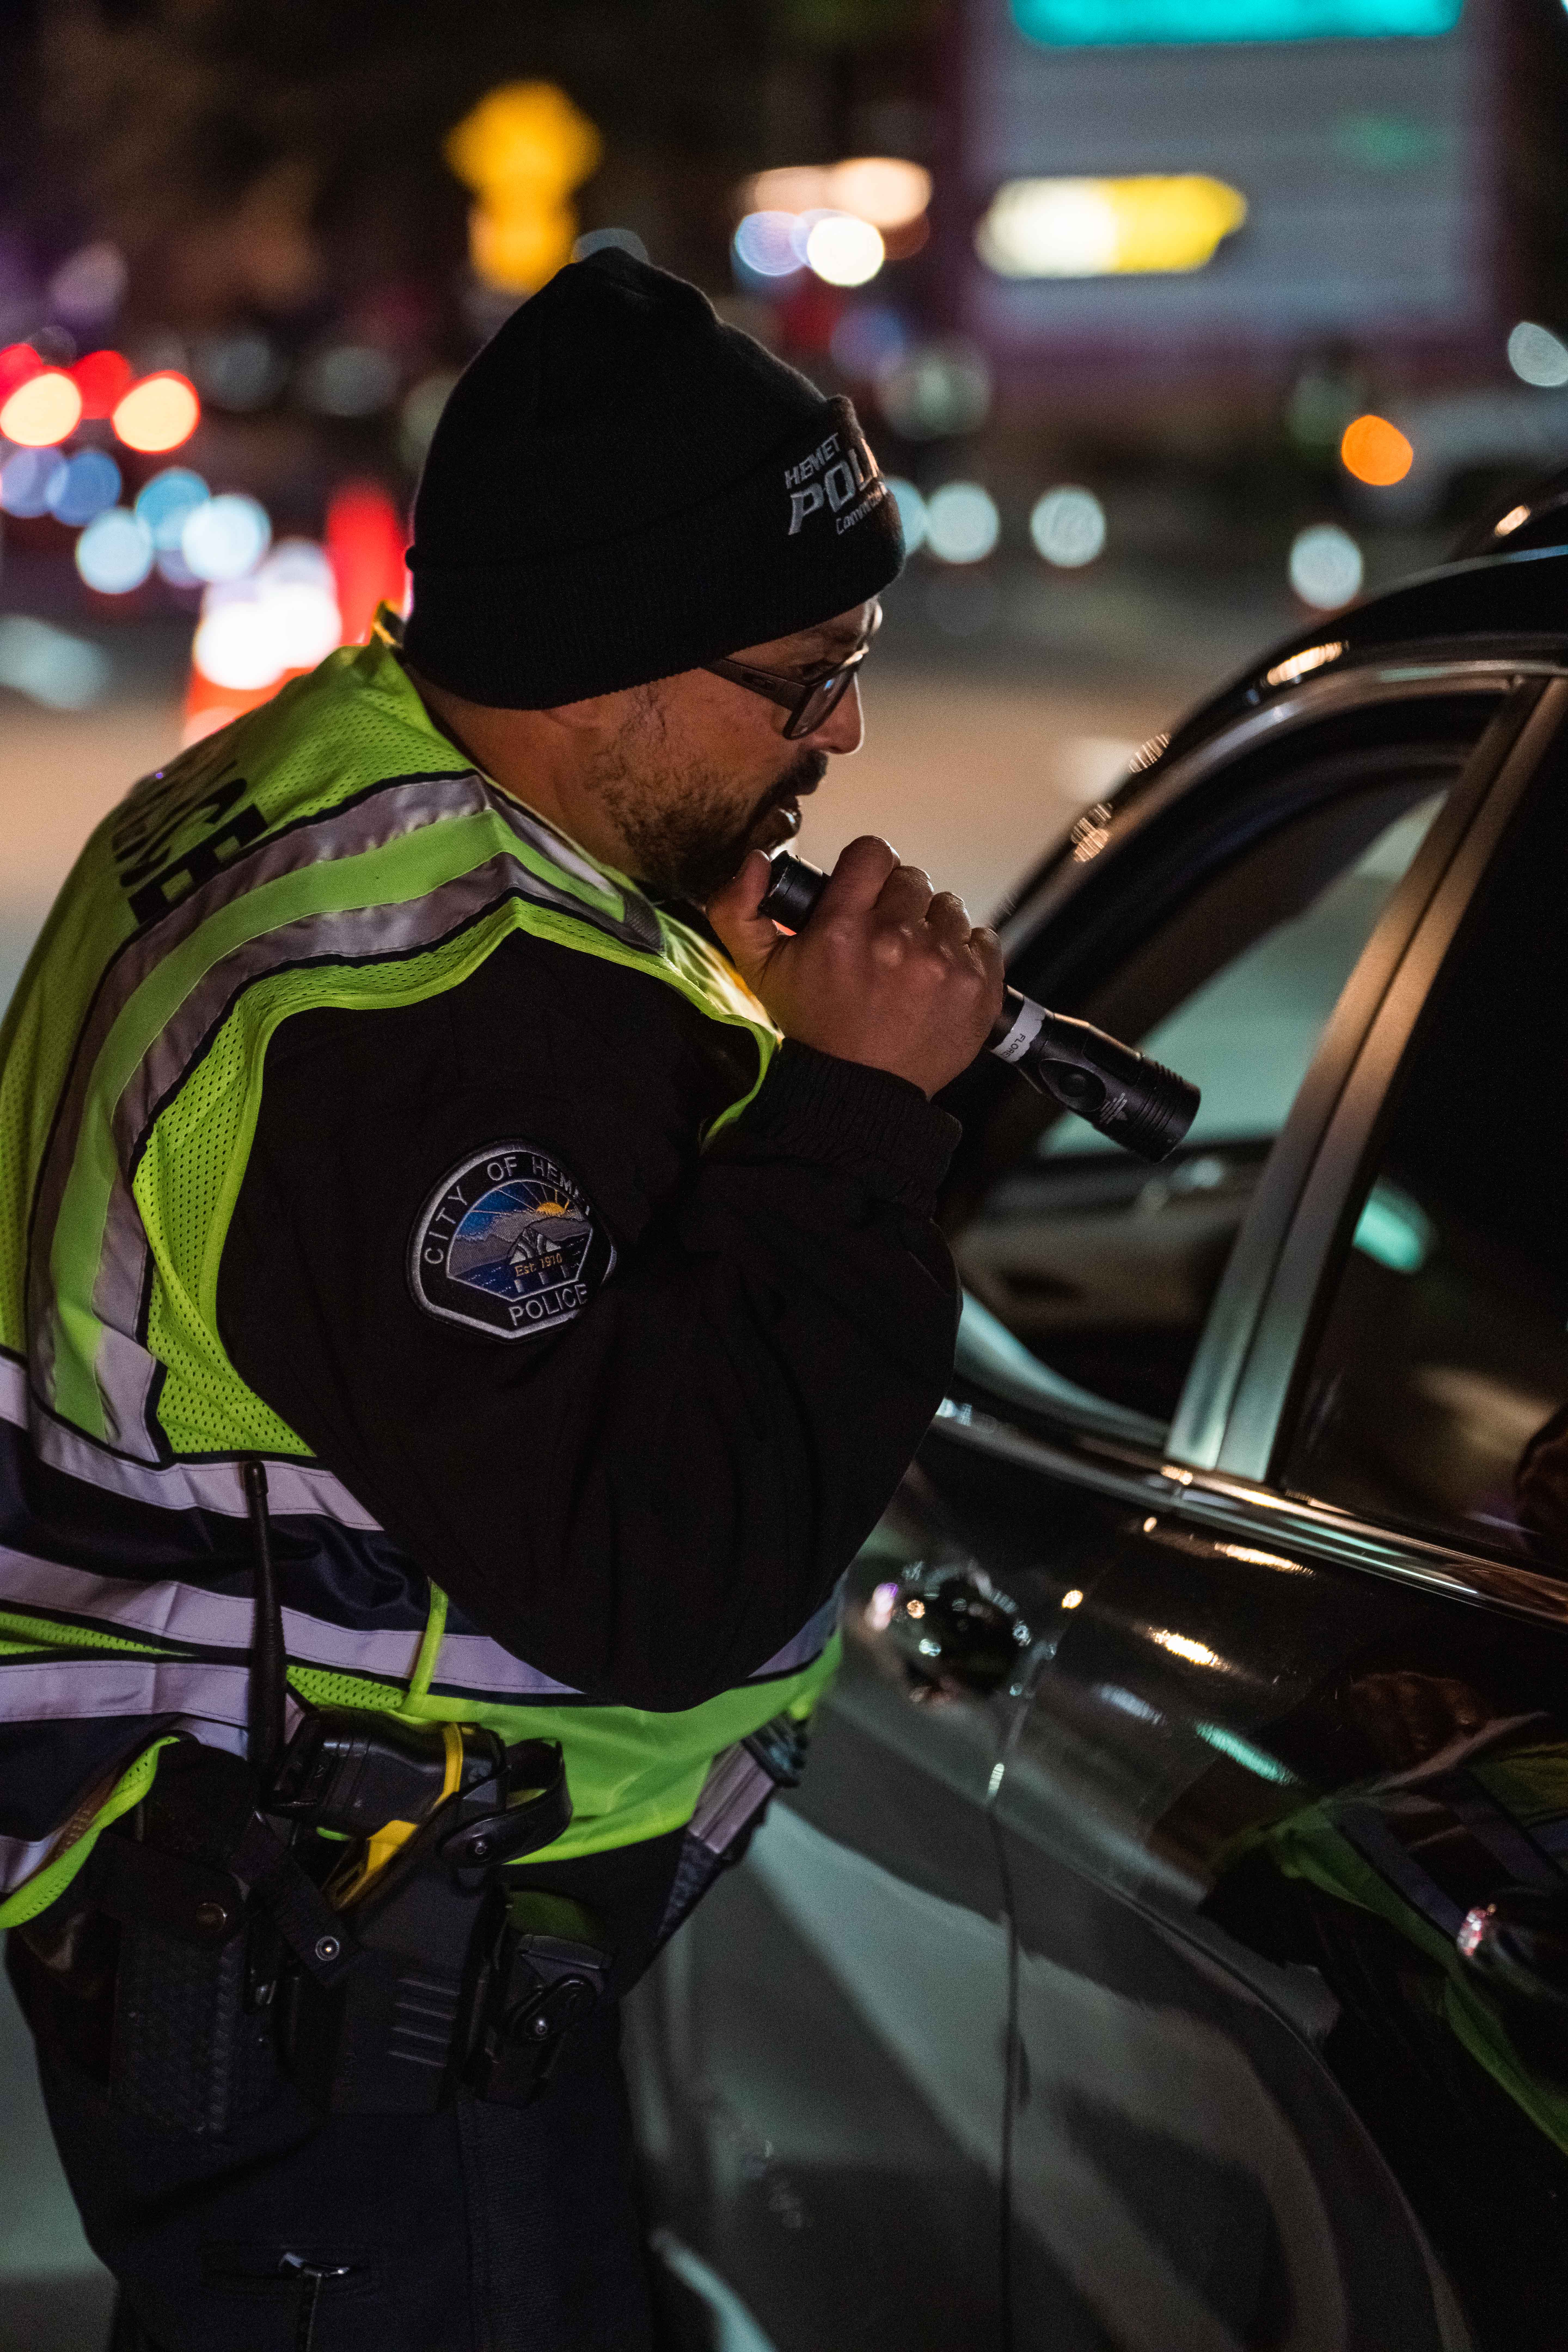 Hemet Police to Conduct DUI Safety Checkpoint